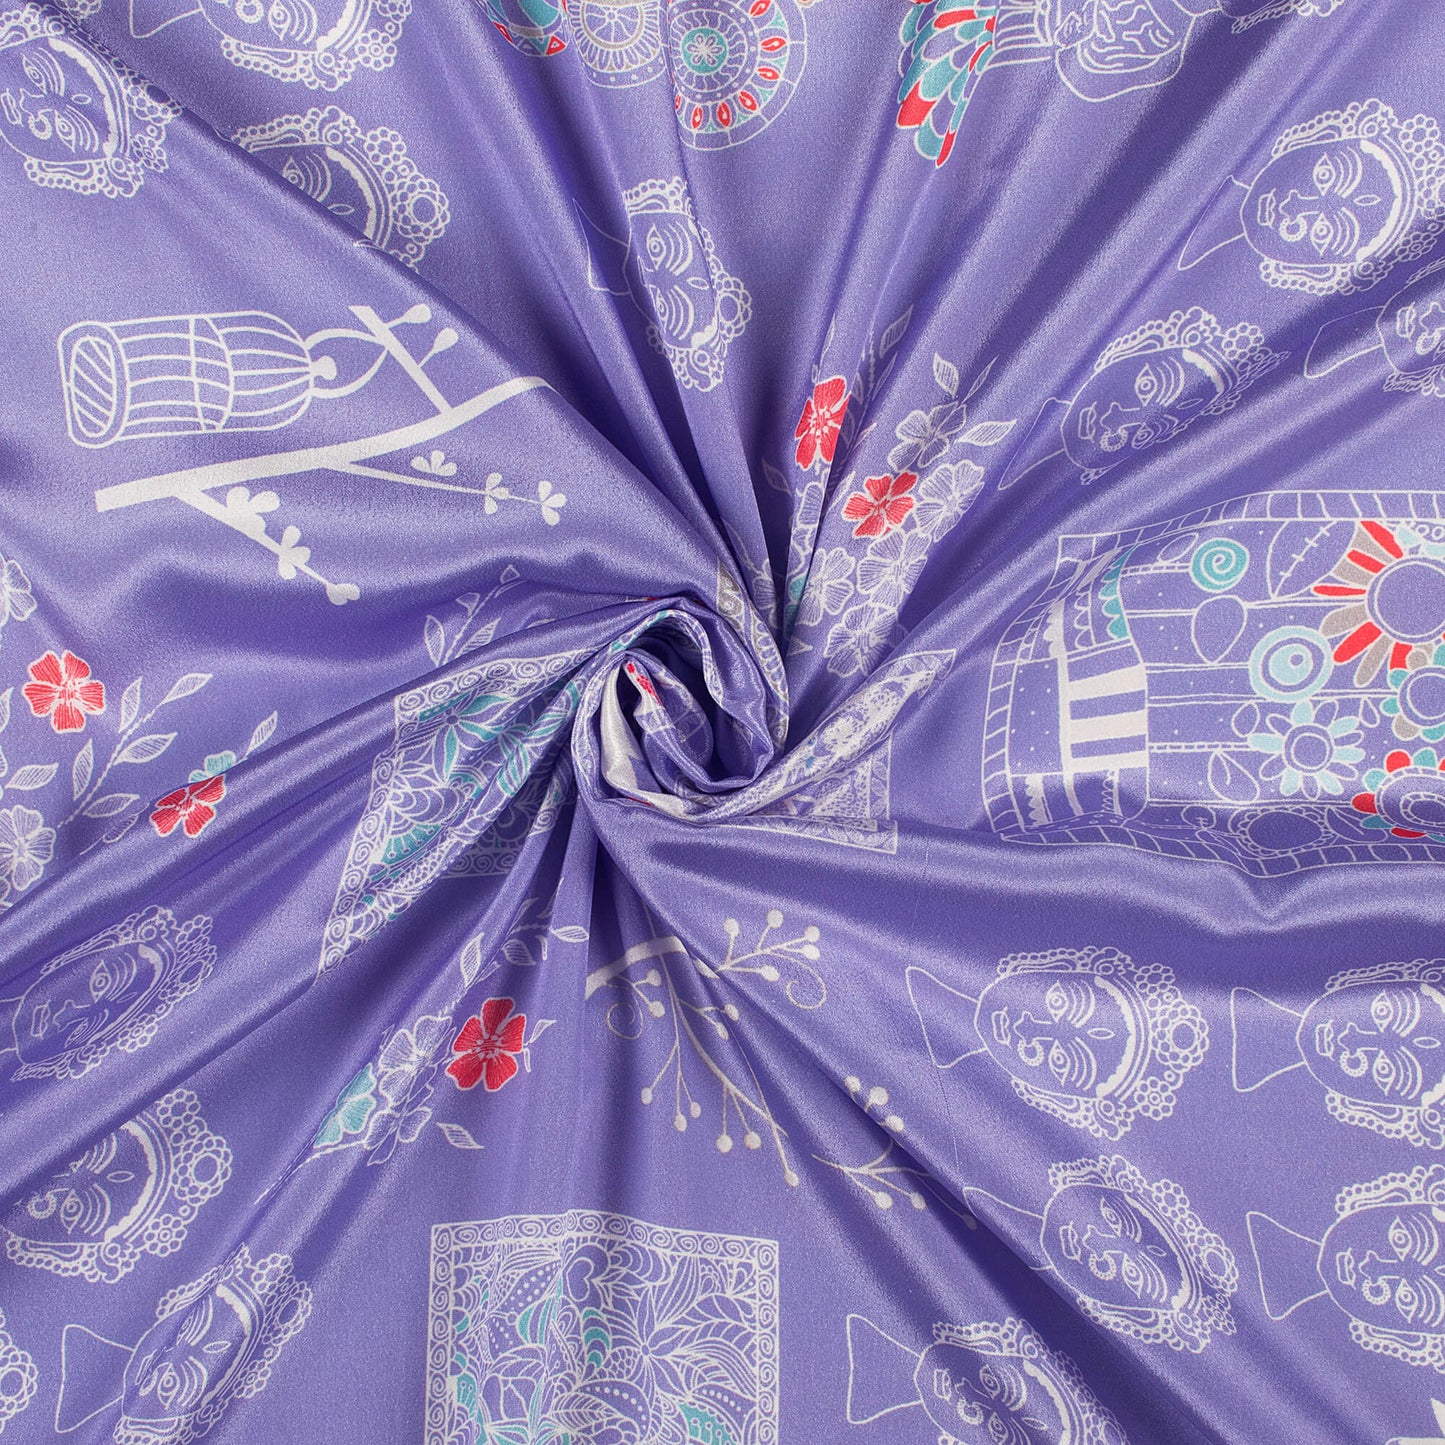 Exclusive Quirky Digital Print Crepe Silk Fabric